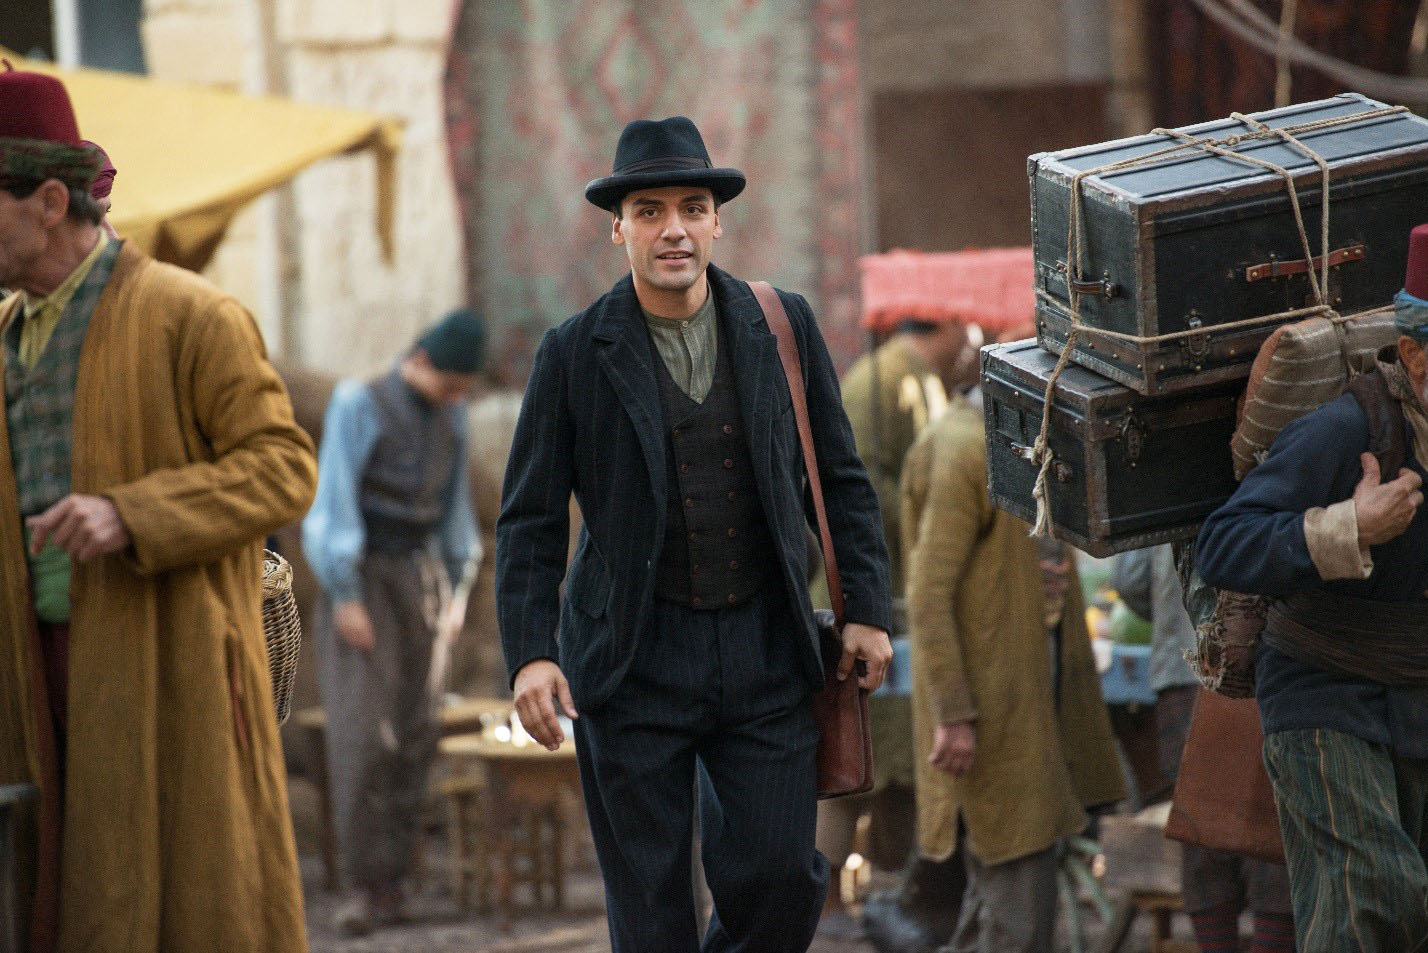 The Promise, the first wide-release feature film about the Armenian Genocide, opens around the world